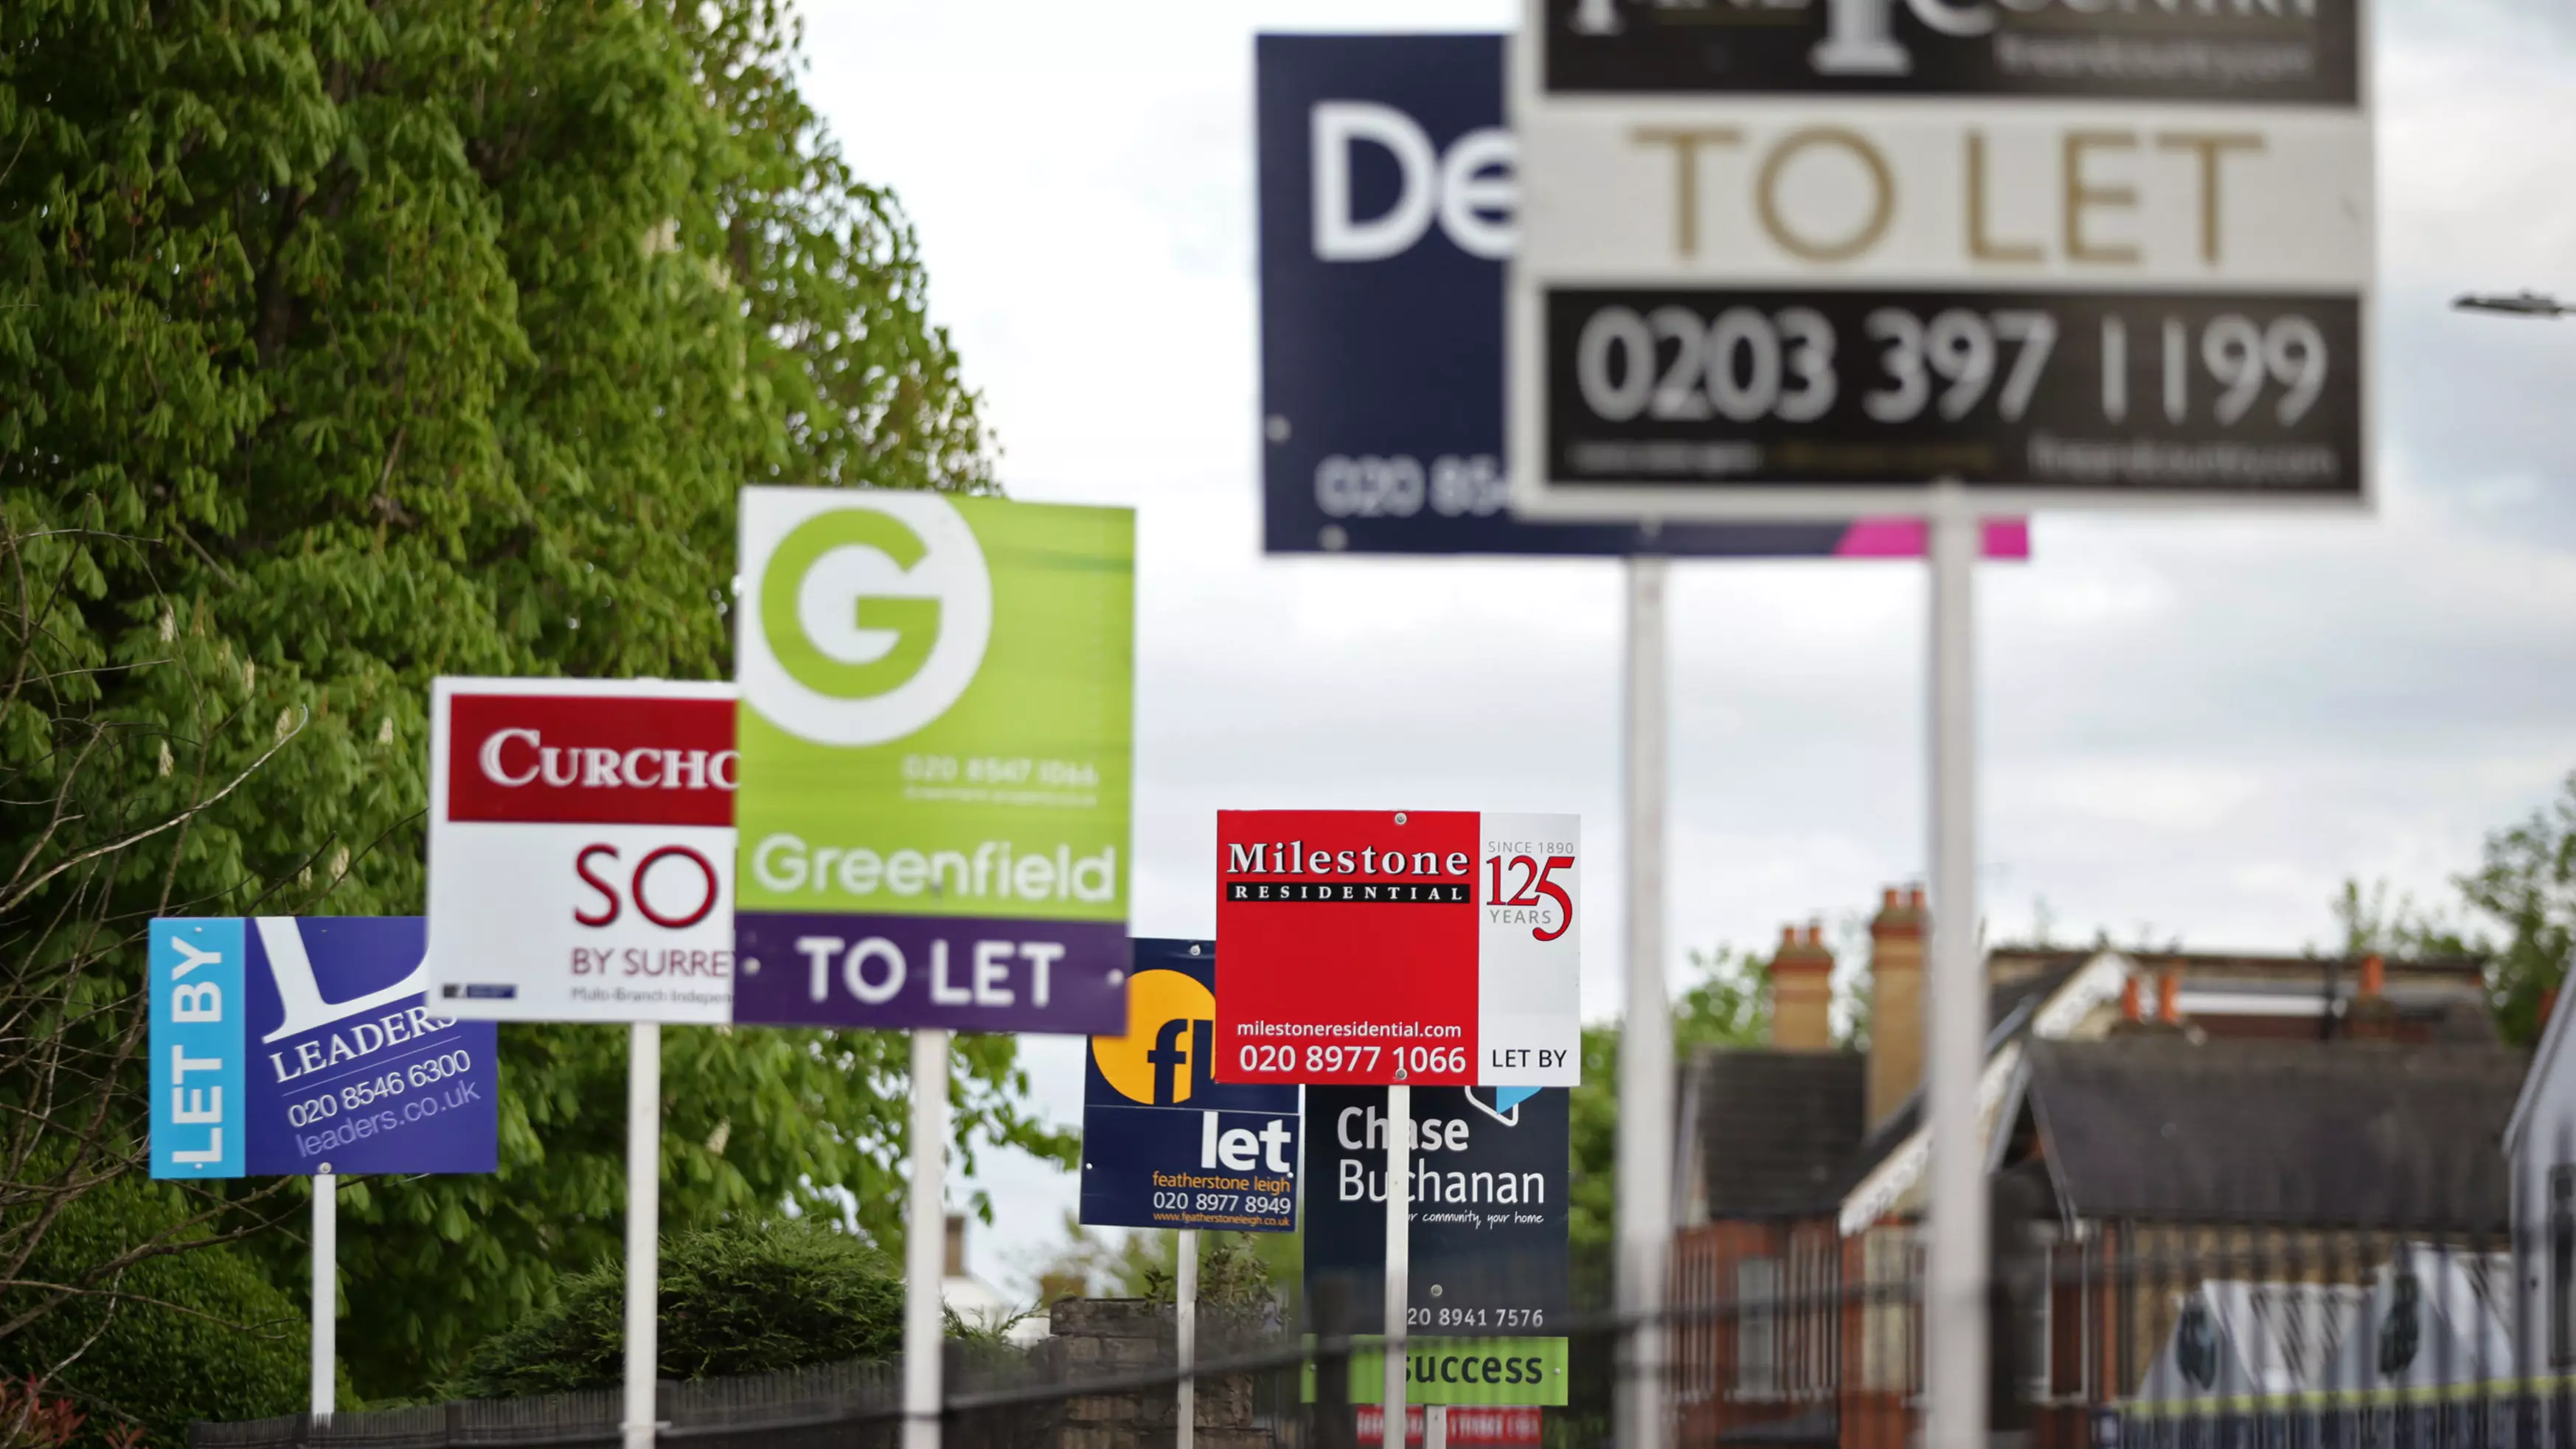 No-Fault Evictions To Be Banned In England, Giving More Rights To Tenants